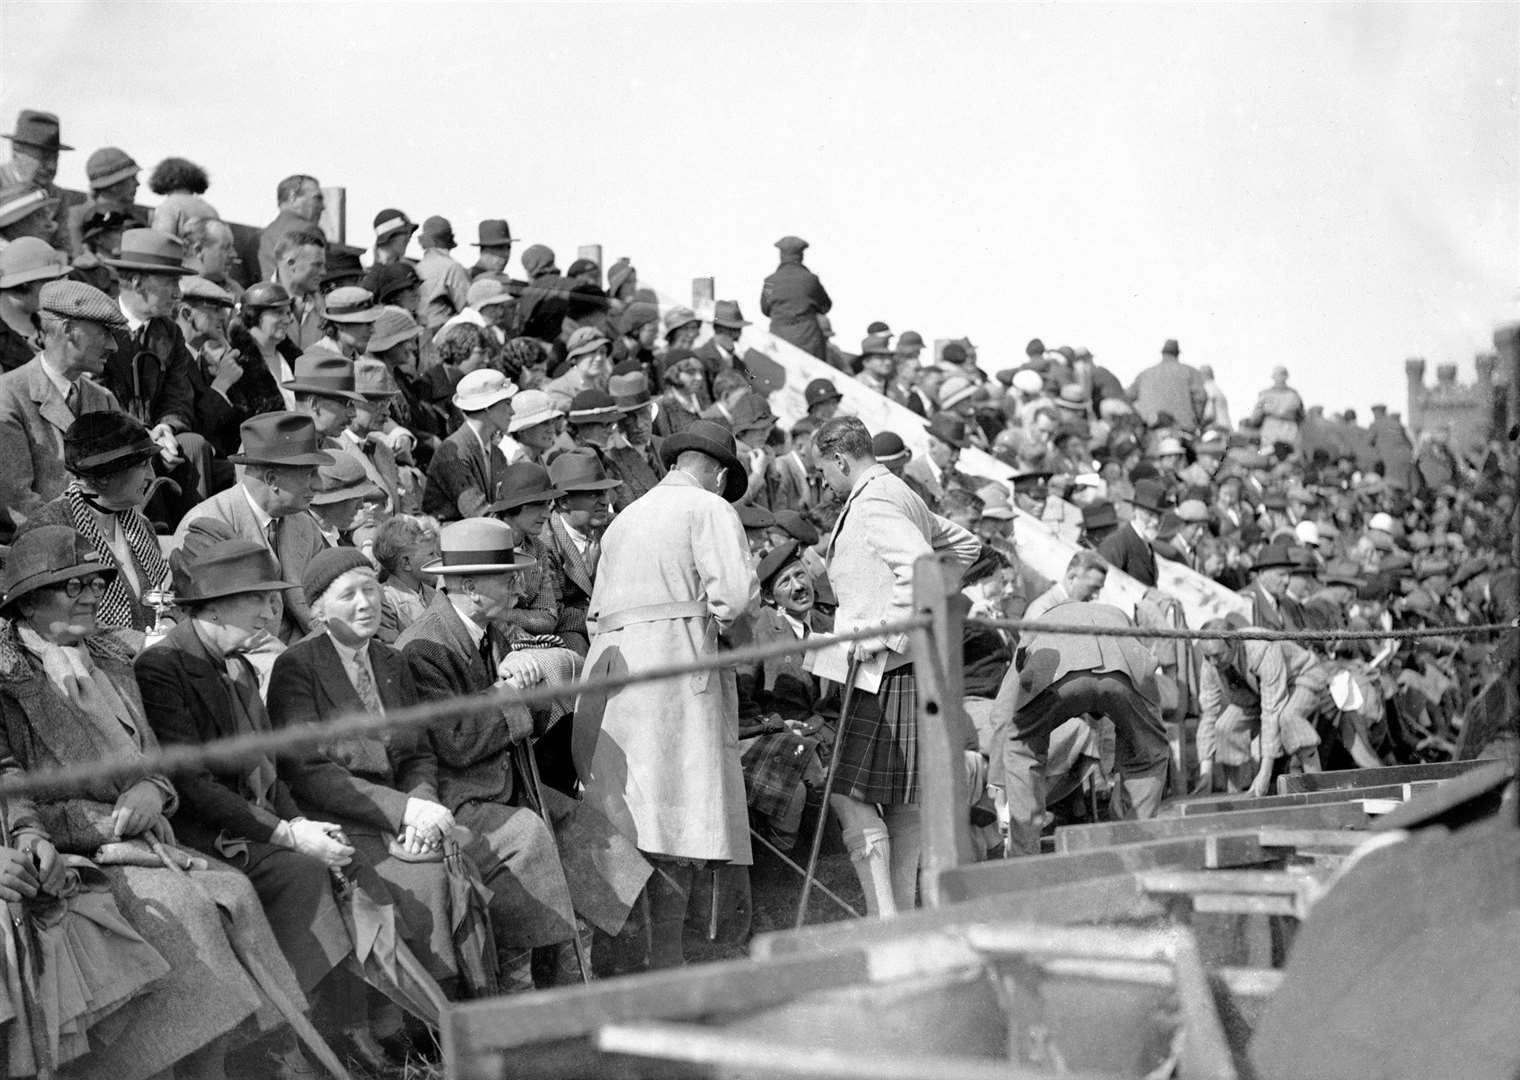 Sir Archibald Sinclair in the kilt, speaking to some spectators at the centenary show. This show brought in record attendance and takings of £600. Photograph courtesy of the Wick Society, Johnston Collection